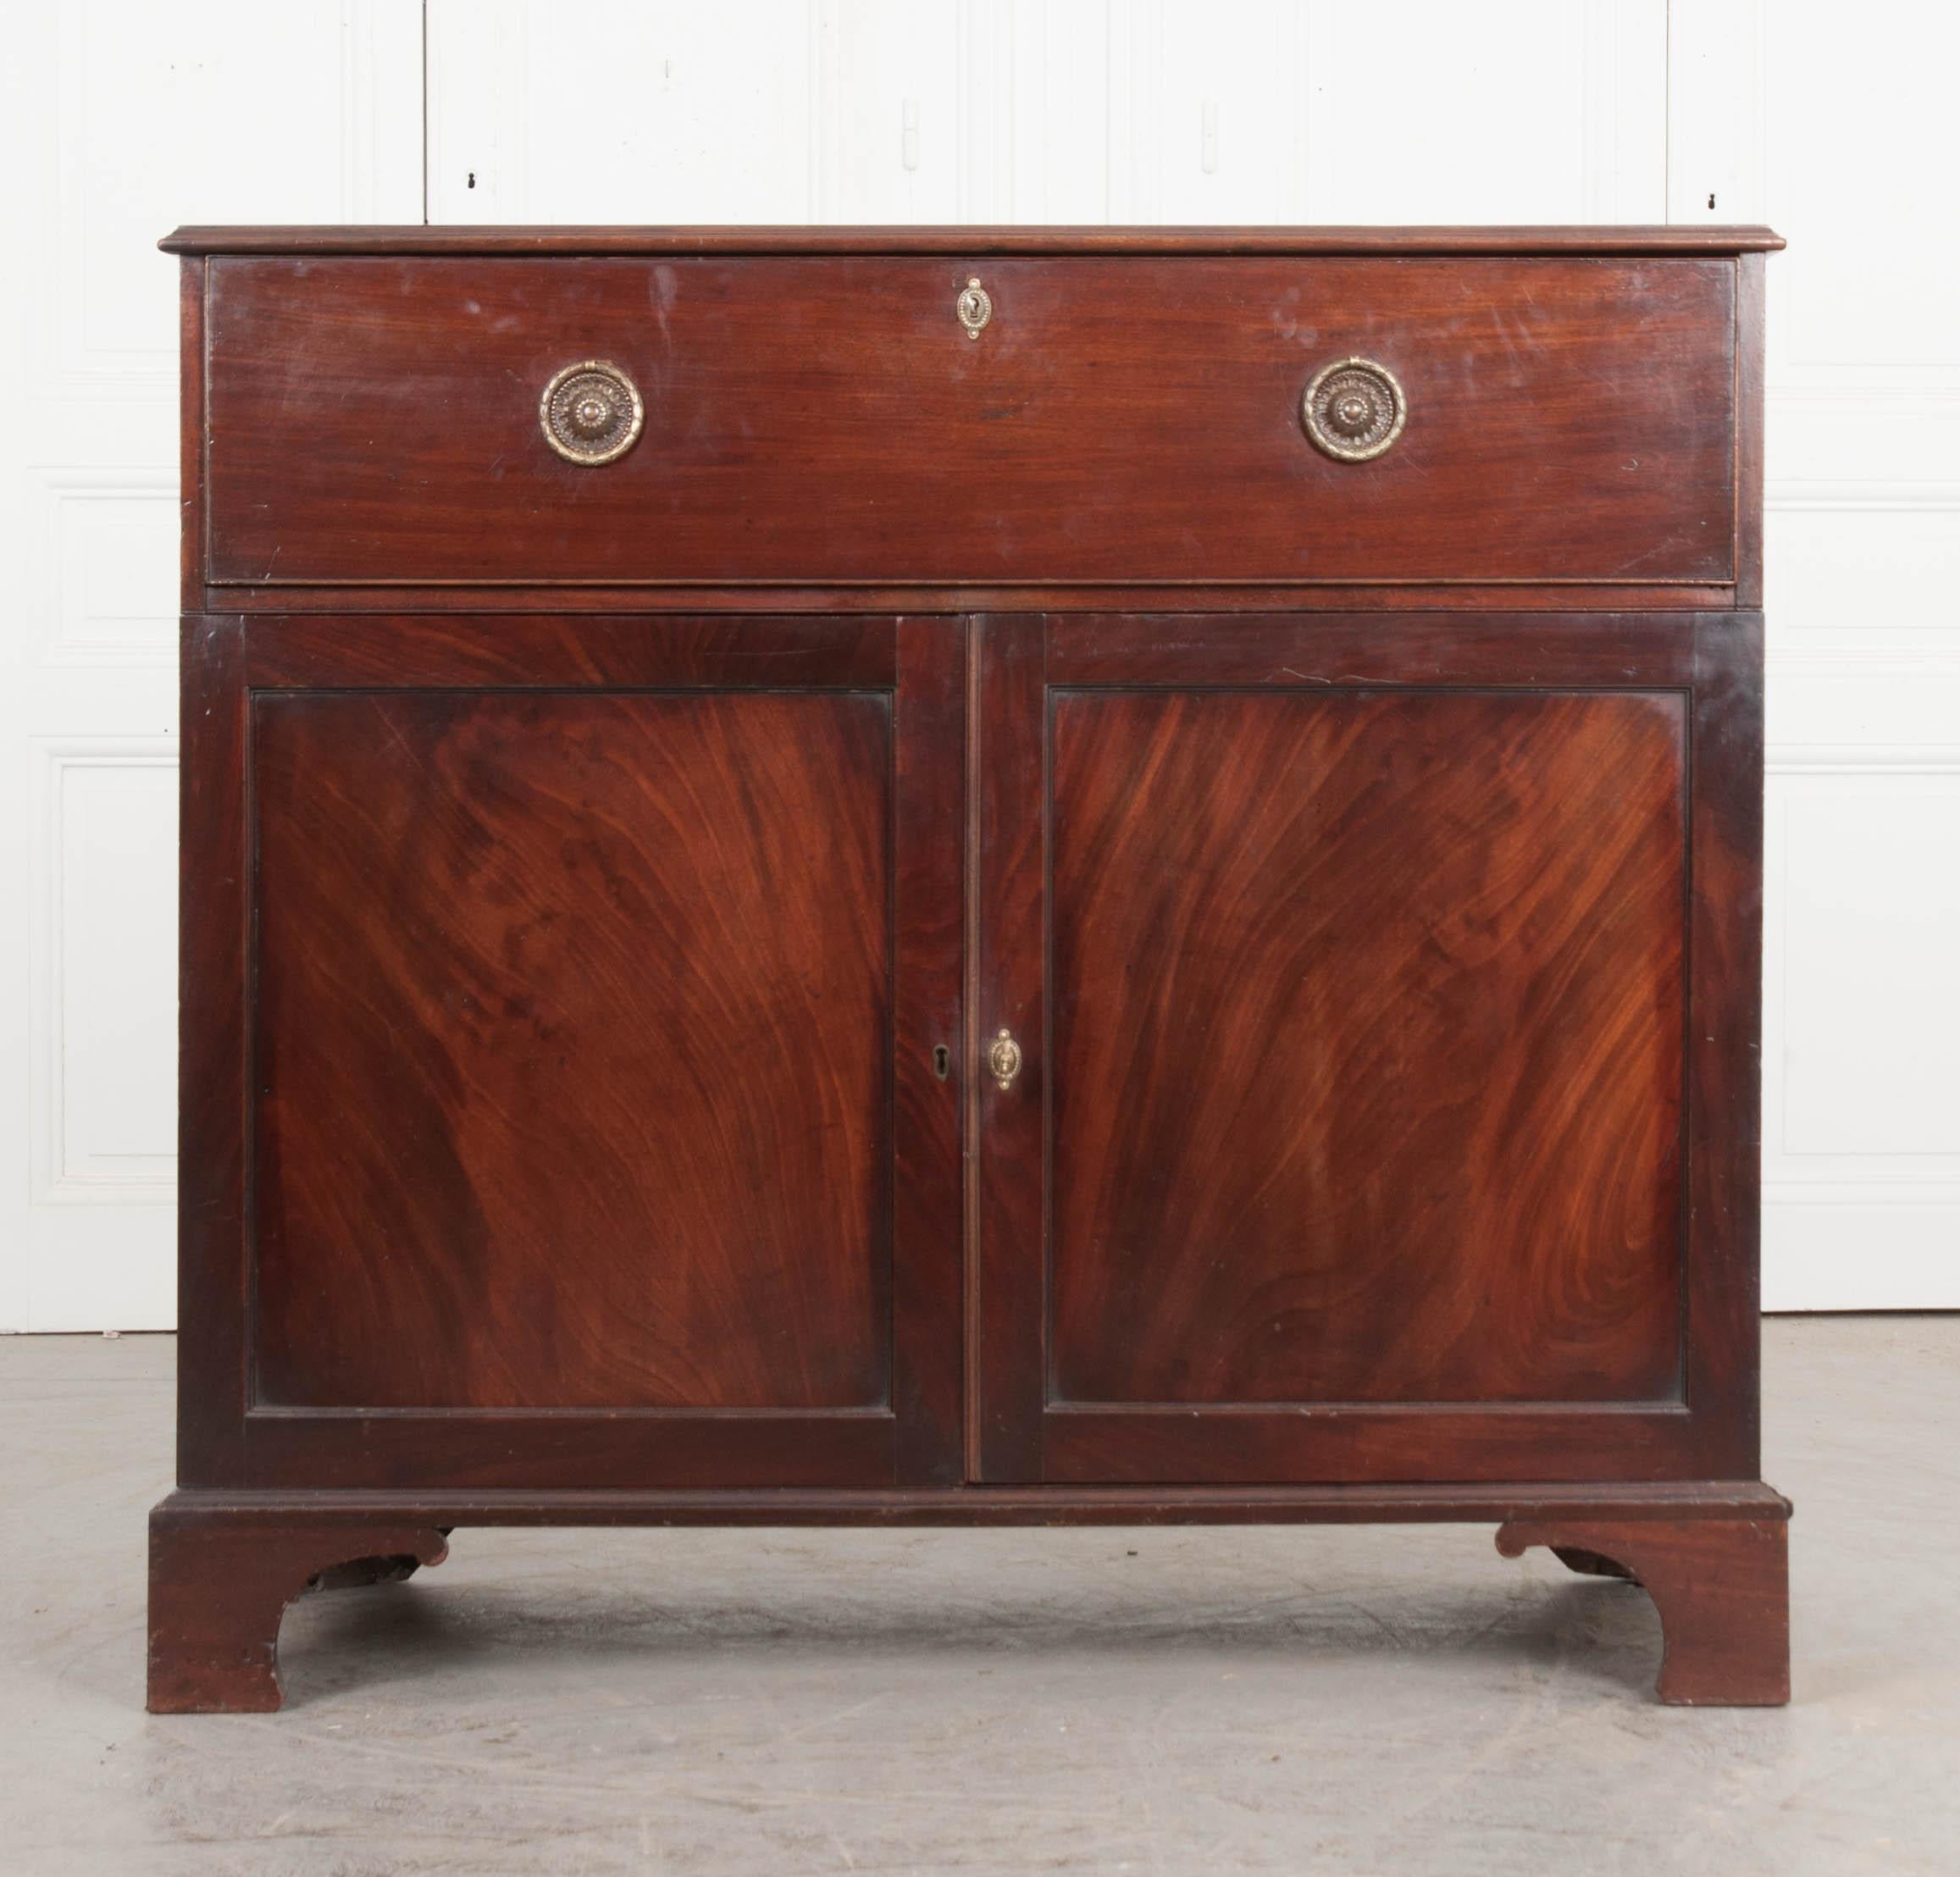 This 19th century flame mahogany drop-front secretary/linen press, circa 1860s, is a Dutch interpretation of the Classic English Georgian style. It features a drop-front writing surface with a bank of ten cubbies over a central drawer with brass